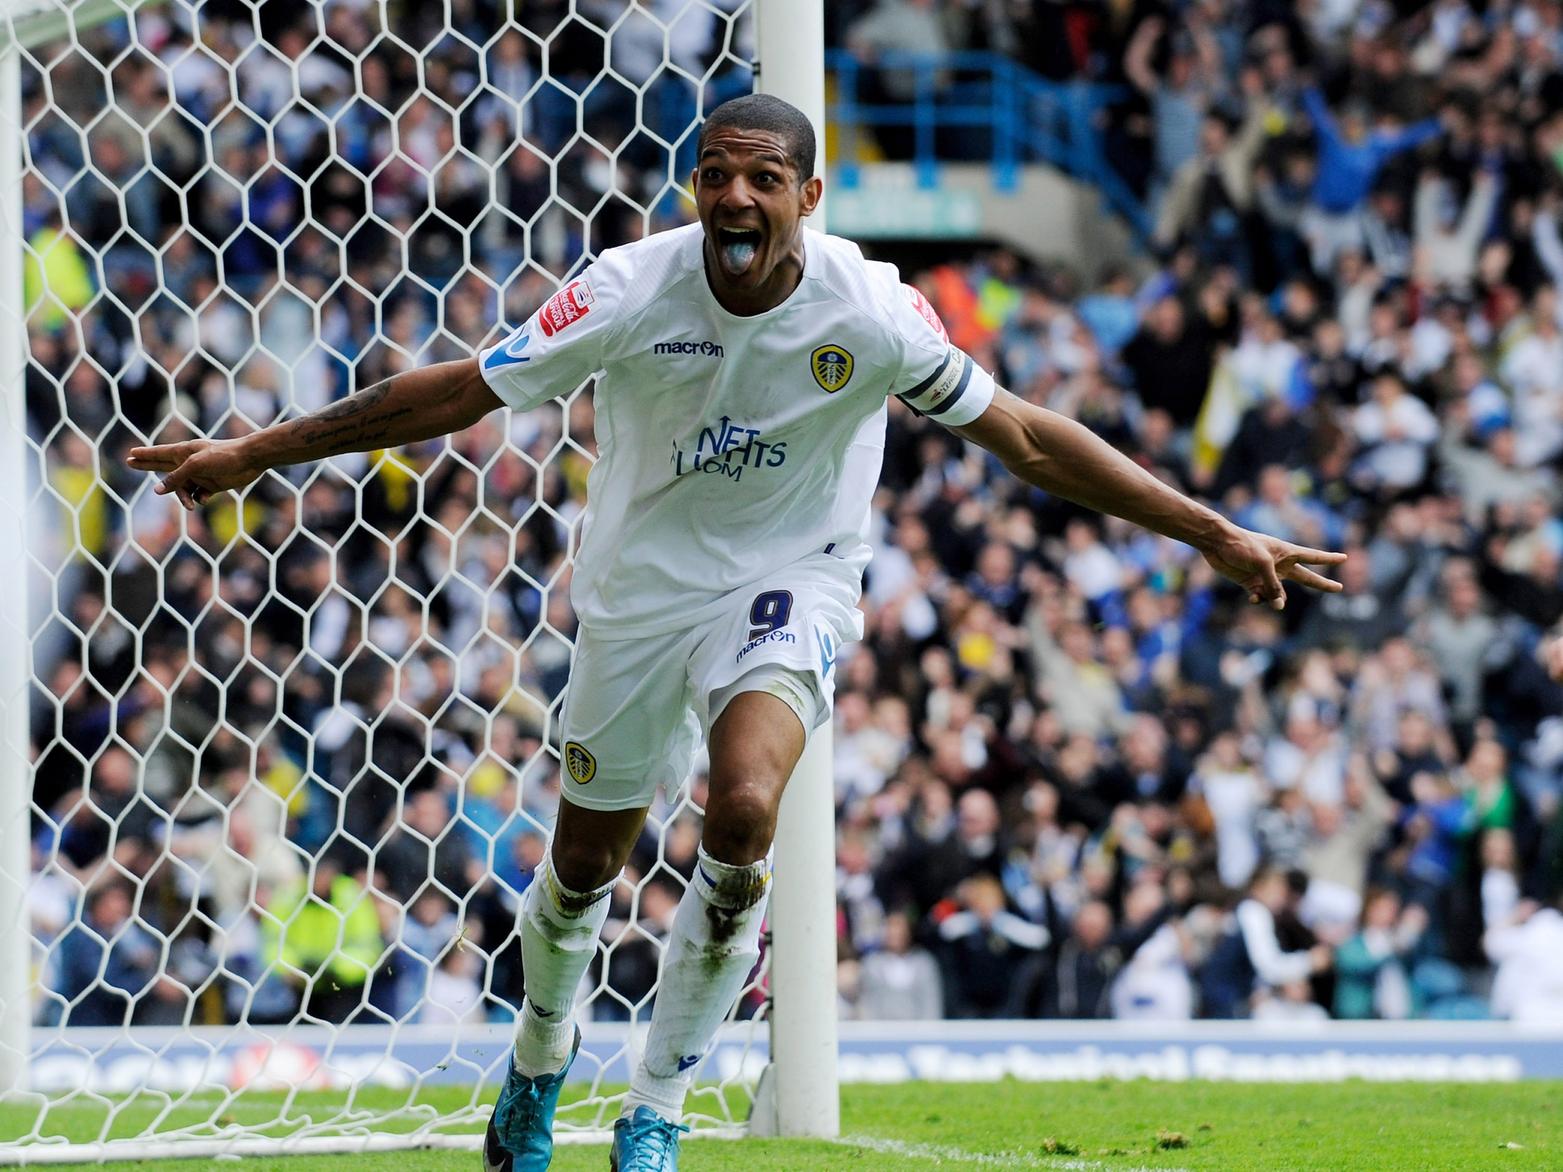 January 3 remember the date? Beckford scored the winner as well as the goal that secured Leeds United's promotion back to the Championship.